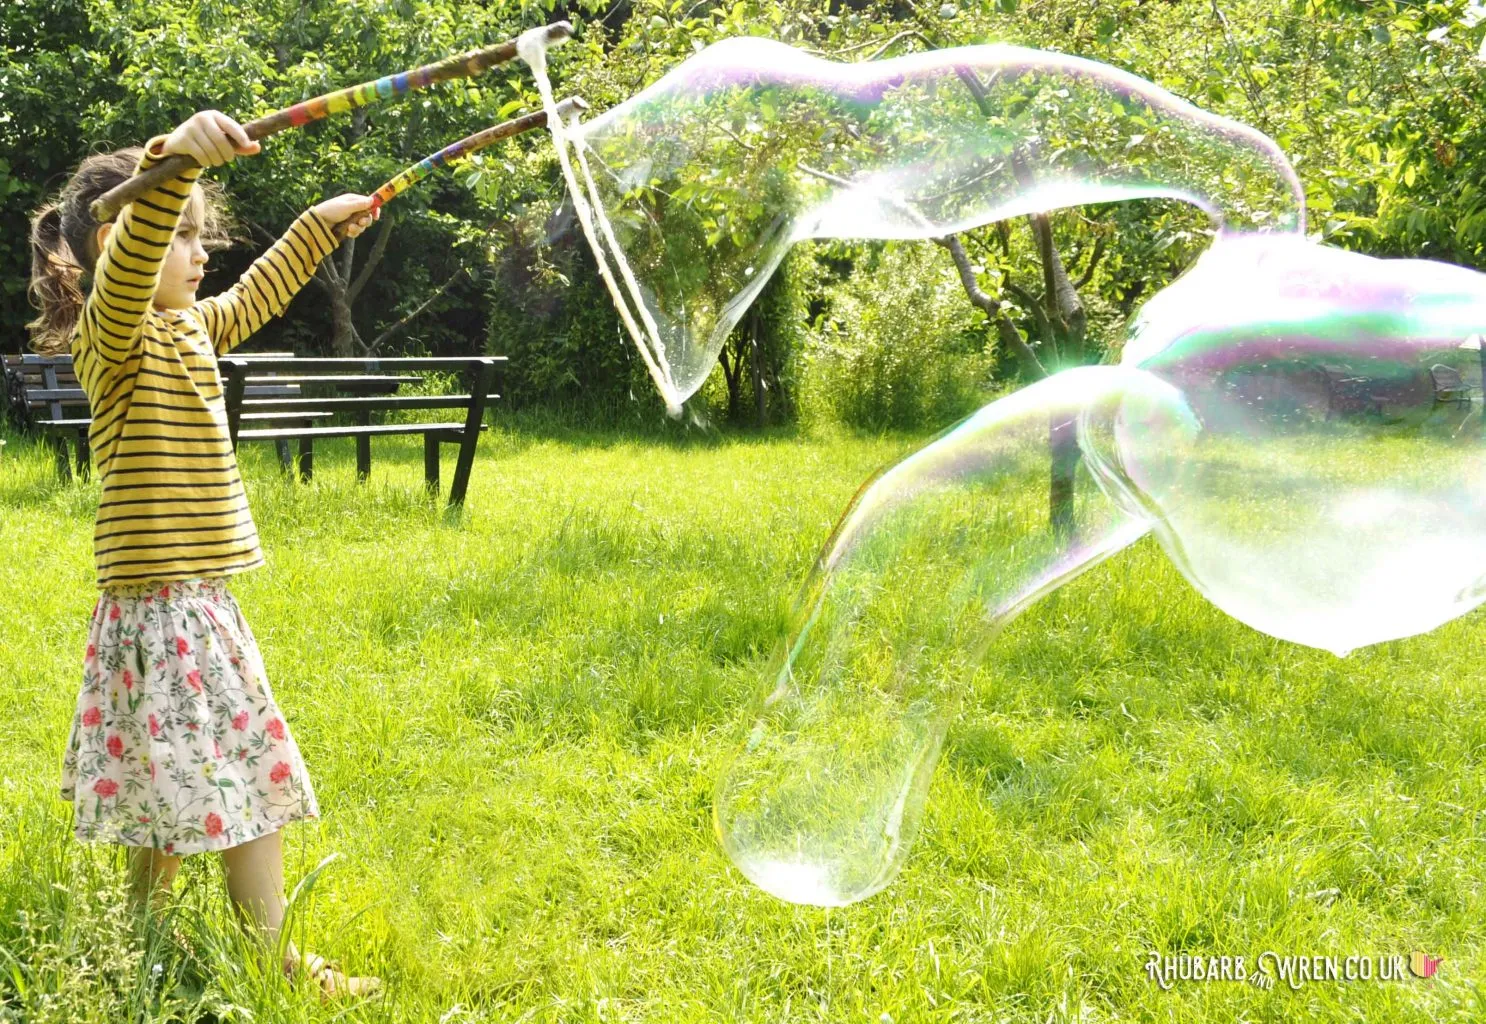 Giant bubbles made with diy bubble mix recipe and wands